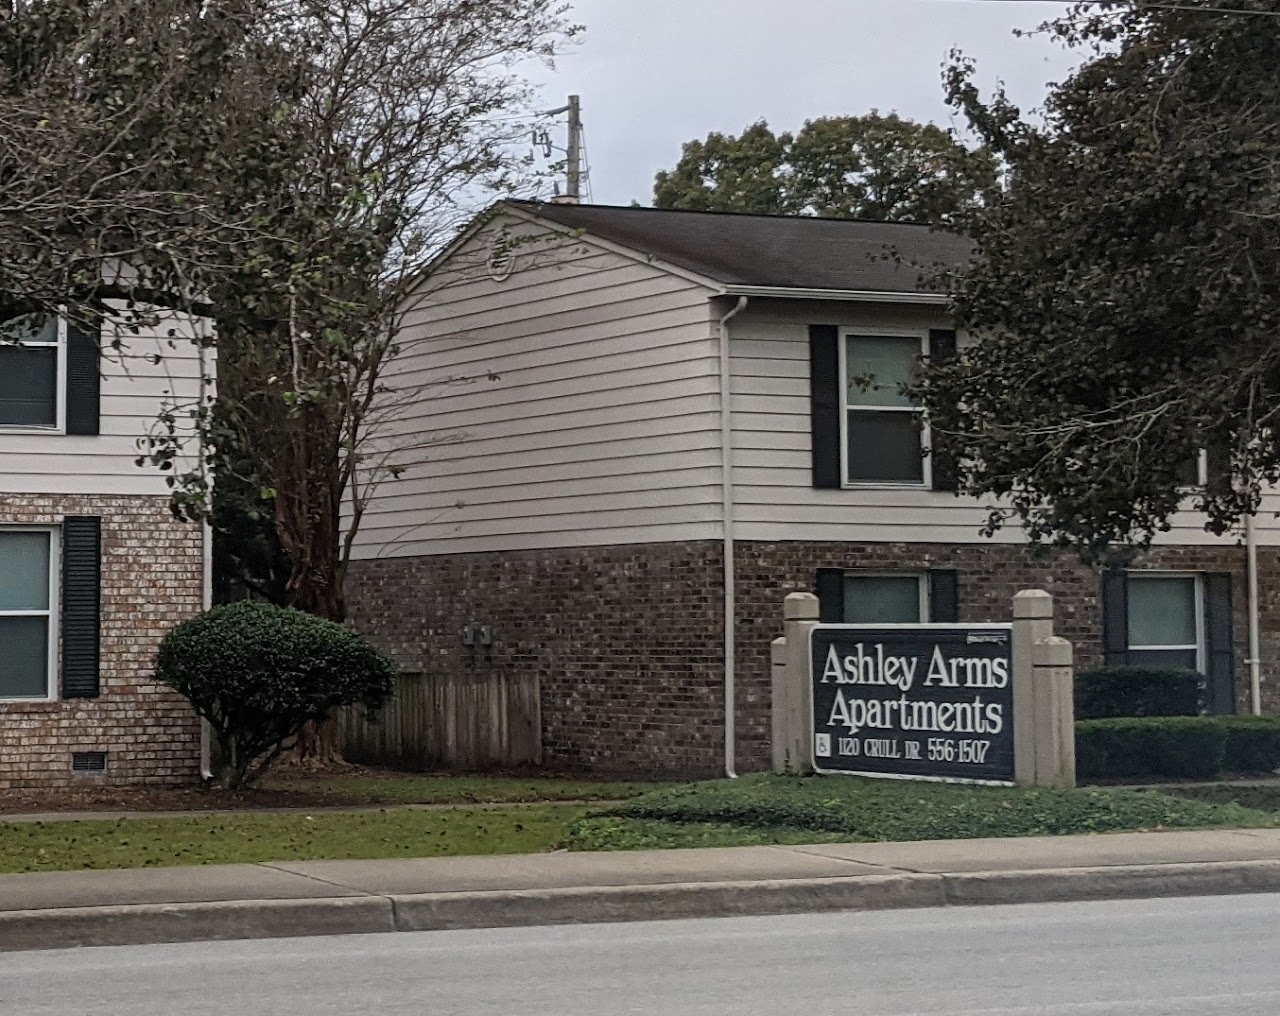 Photo of ASHLEY ARMS. Affordable housing located at 1120 CRULL DRIVE CHARLESTON, SC 29407